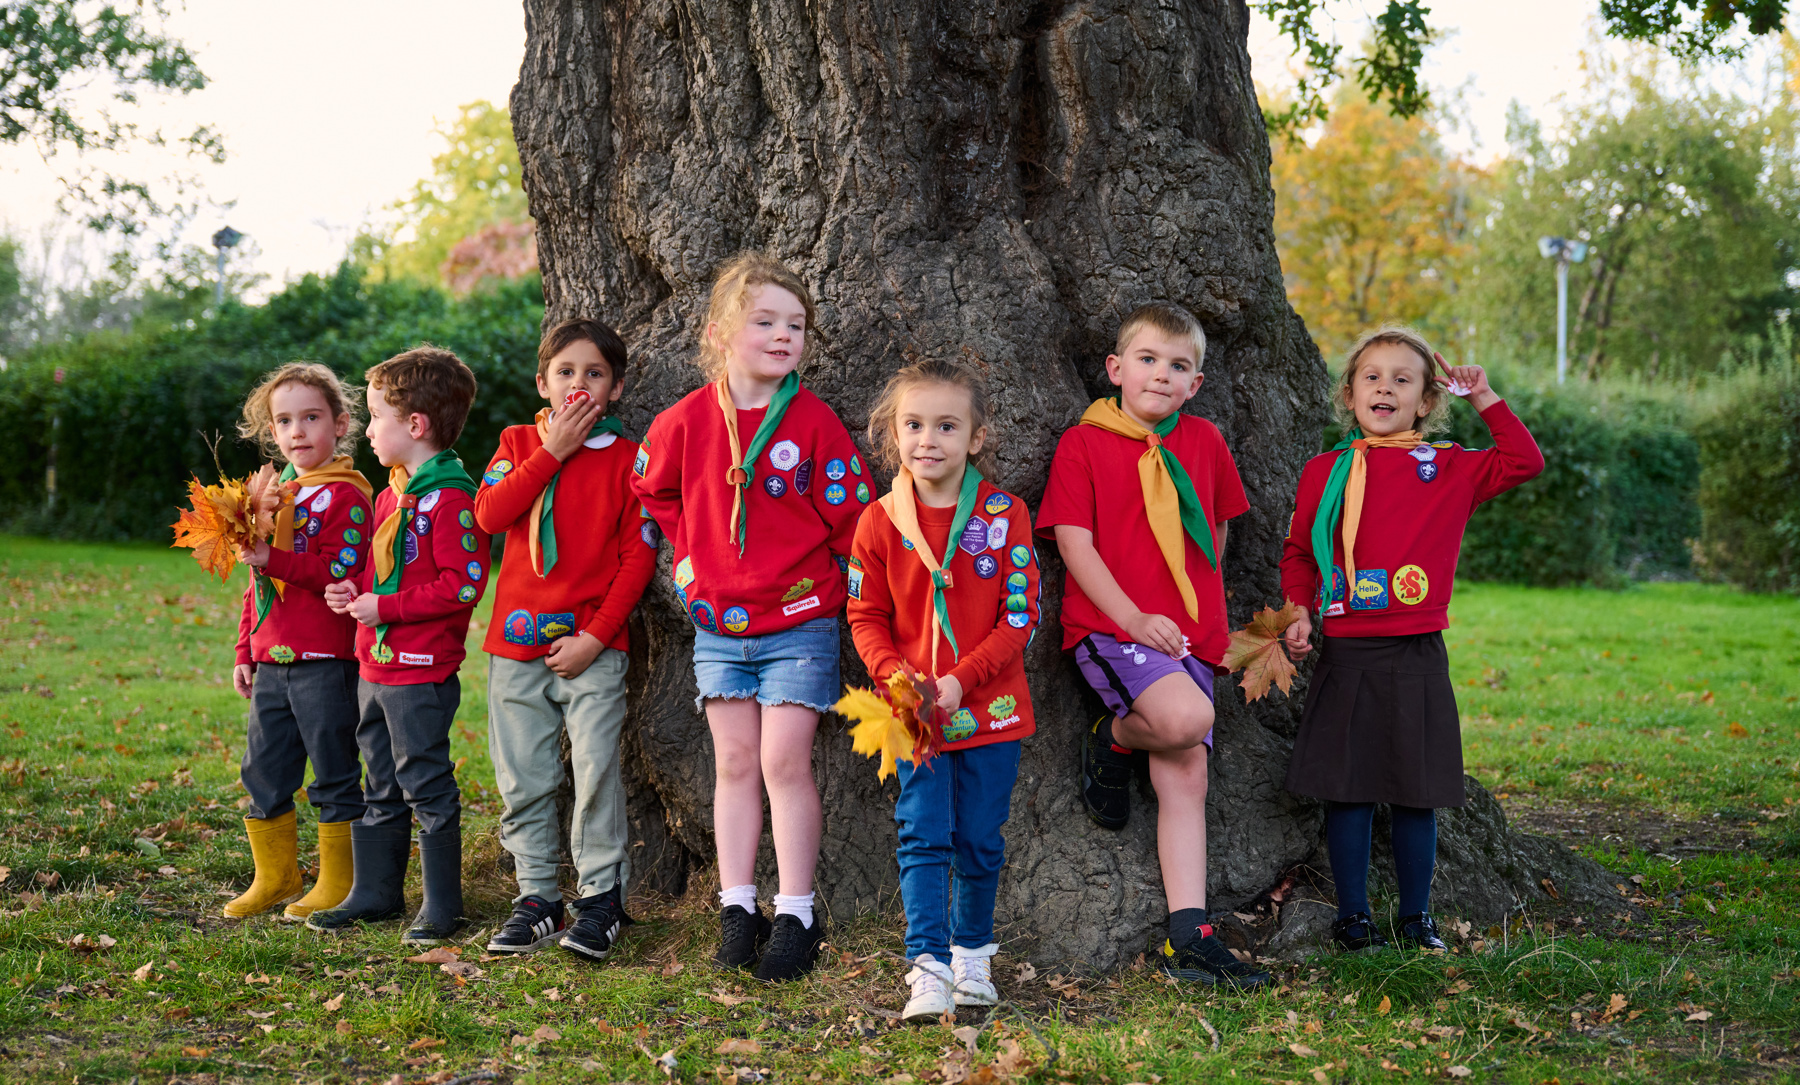 Seven Squirrels in uniform and neckers stand in front of a tree trunk holding leaves in their hands